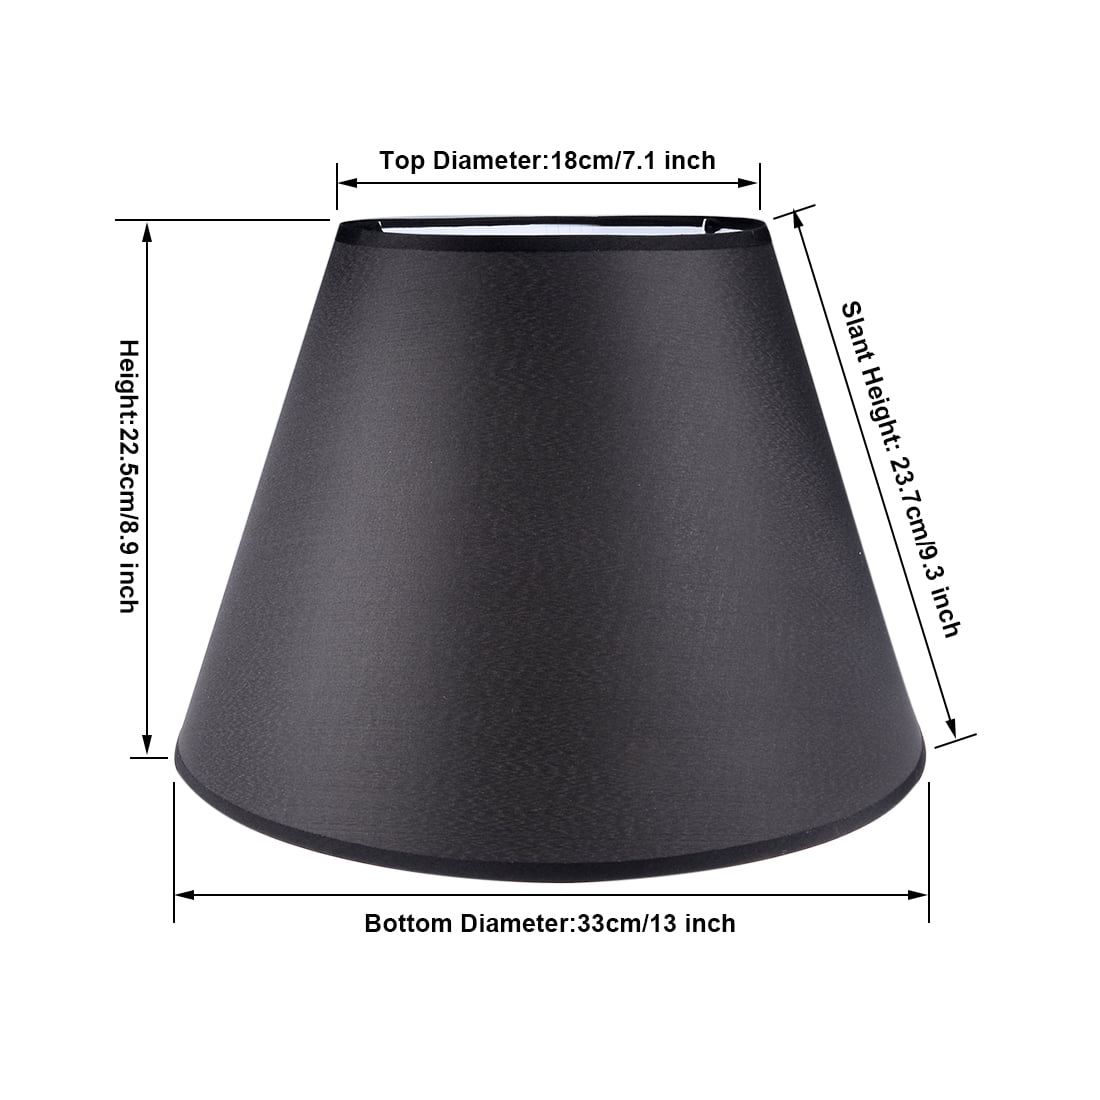 Lampshades Floor Lamp Shade Light Cover, 9 Inch Wide Lamp Shade